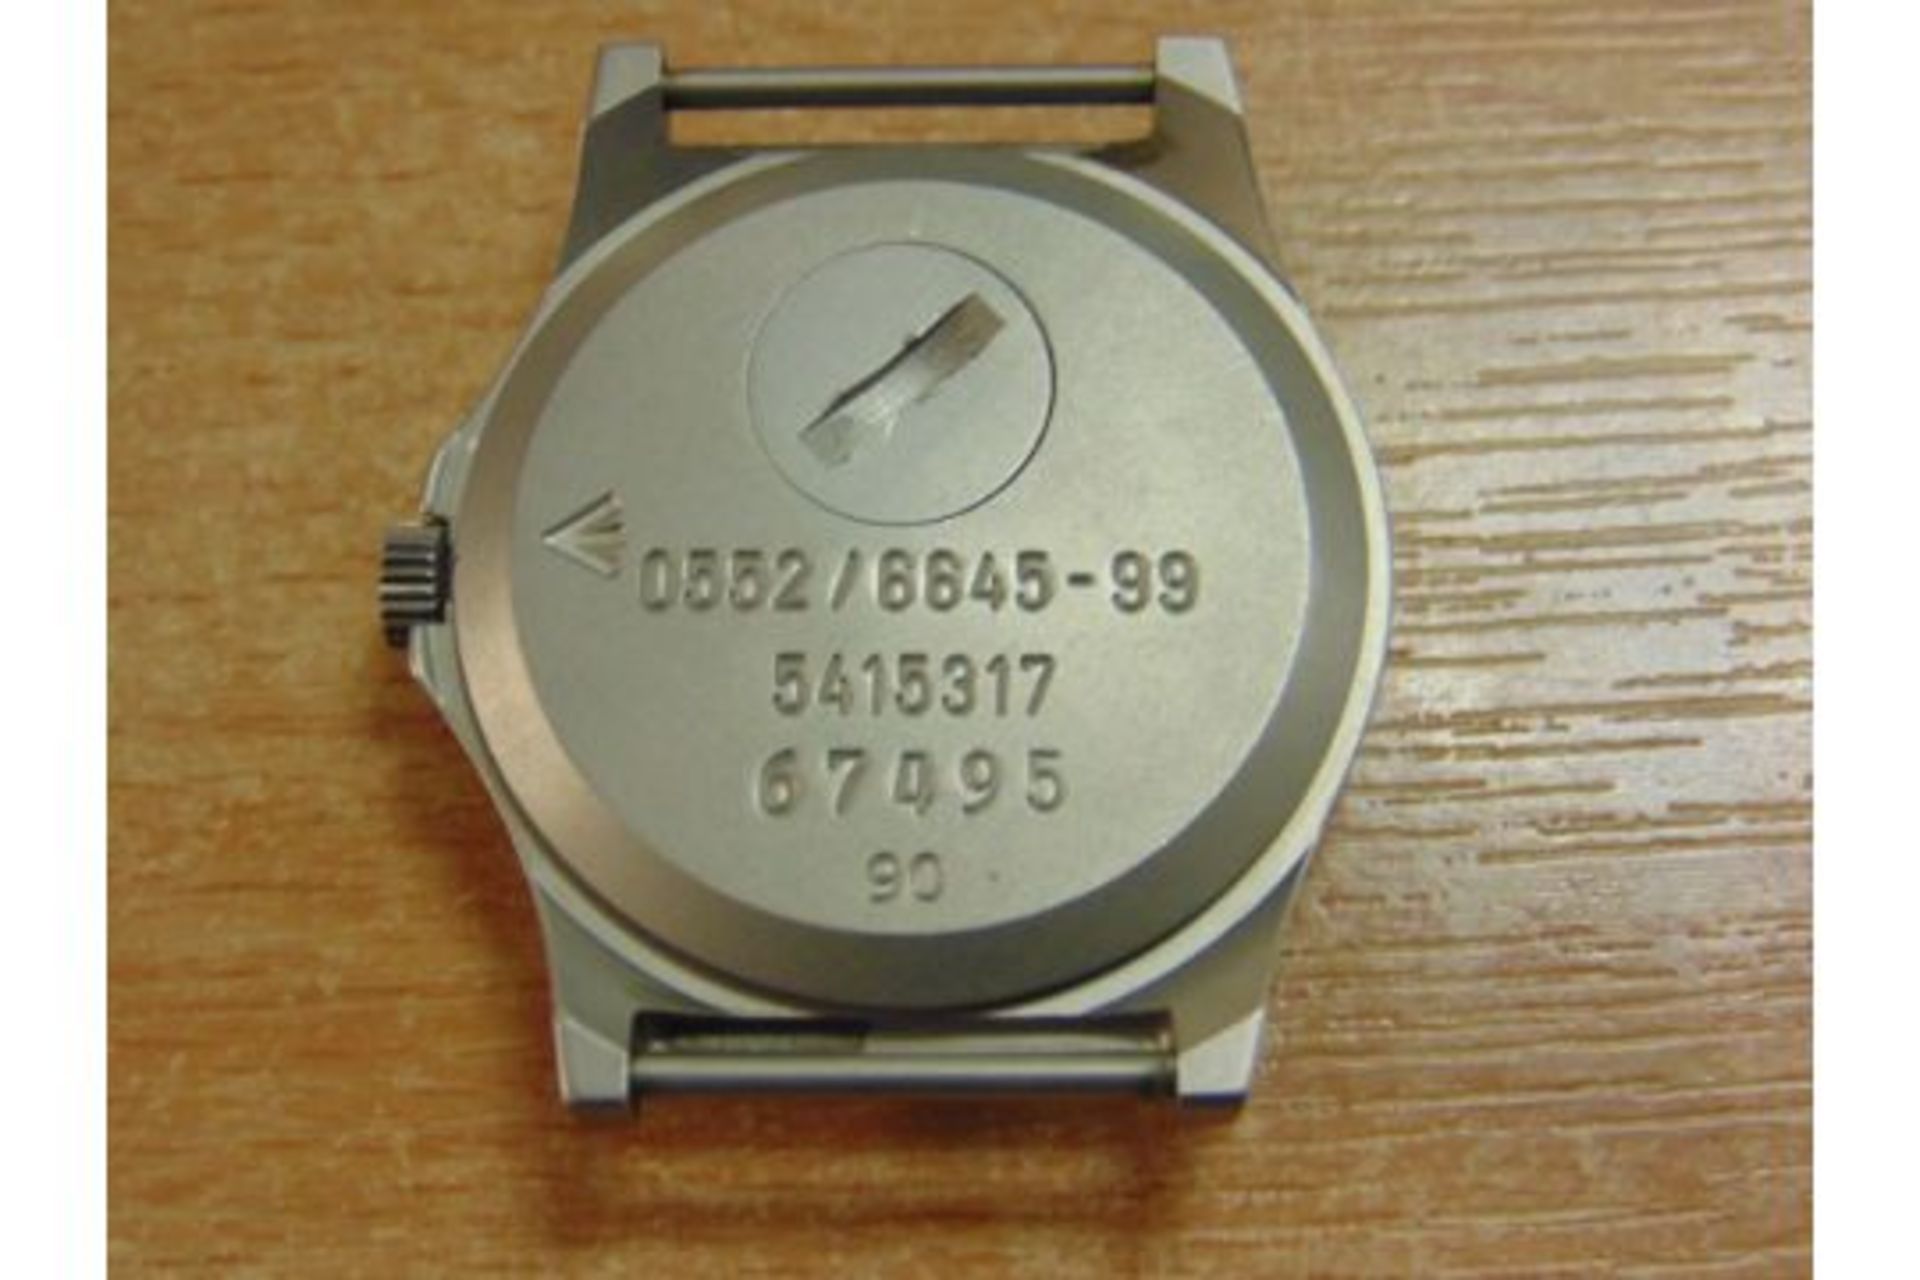 ULTRA RARE CWC 0552 ROYAL NAVY/MARINES ISSUE SERVICE WATCH DATED 1990 GULF WAR - UNISSUED - Image 3 of 8